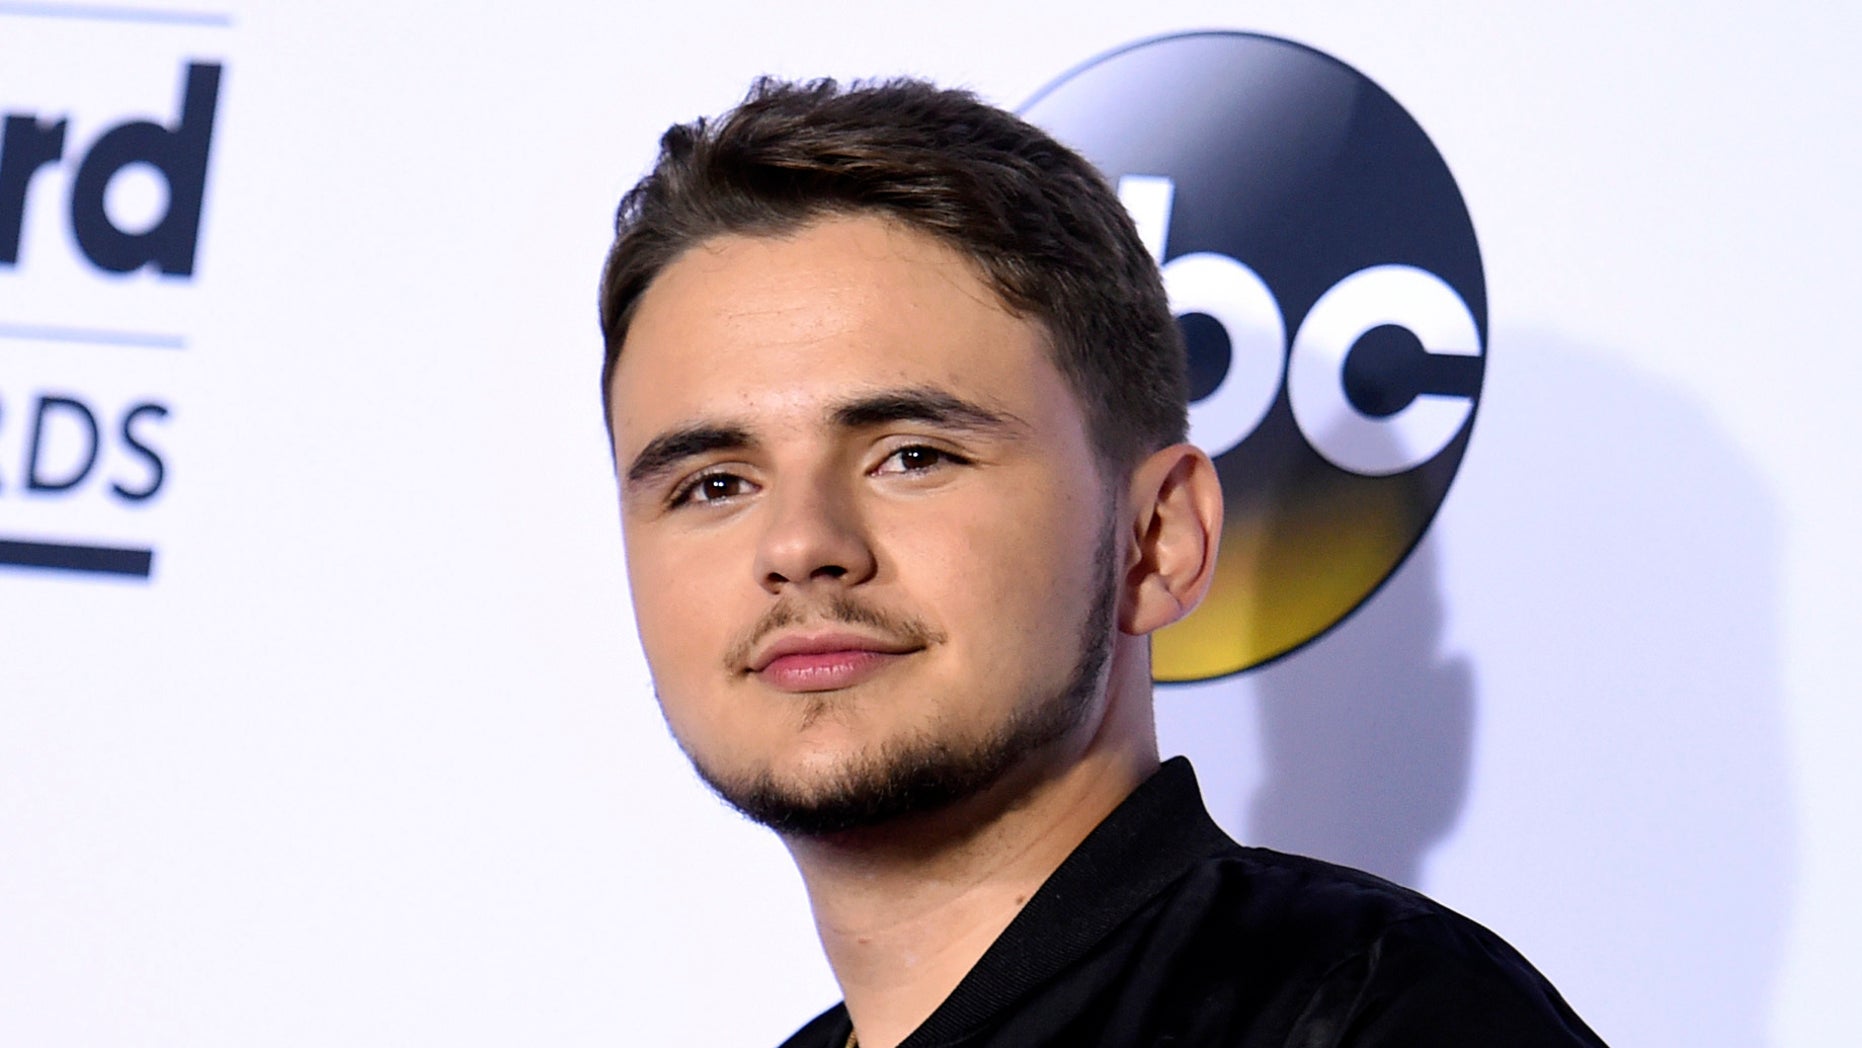 DOSSIER - In this photo of May 21, 2017, Prince Jackson poses in the press room at the Billboard Music Awards in Las Vegas. The eldest son of Michael Jackson, Prince, is a graduate. The 22-year-old Prince Jackson, whose real name is Michael Joseph Jackson Jr., participated in the opening ceremonies on Saturday, May 11, 2019 at the Loyola Marymount University of Los Angeles. (Photo by Richard Shotwell / Invision / AP, File)